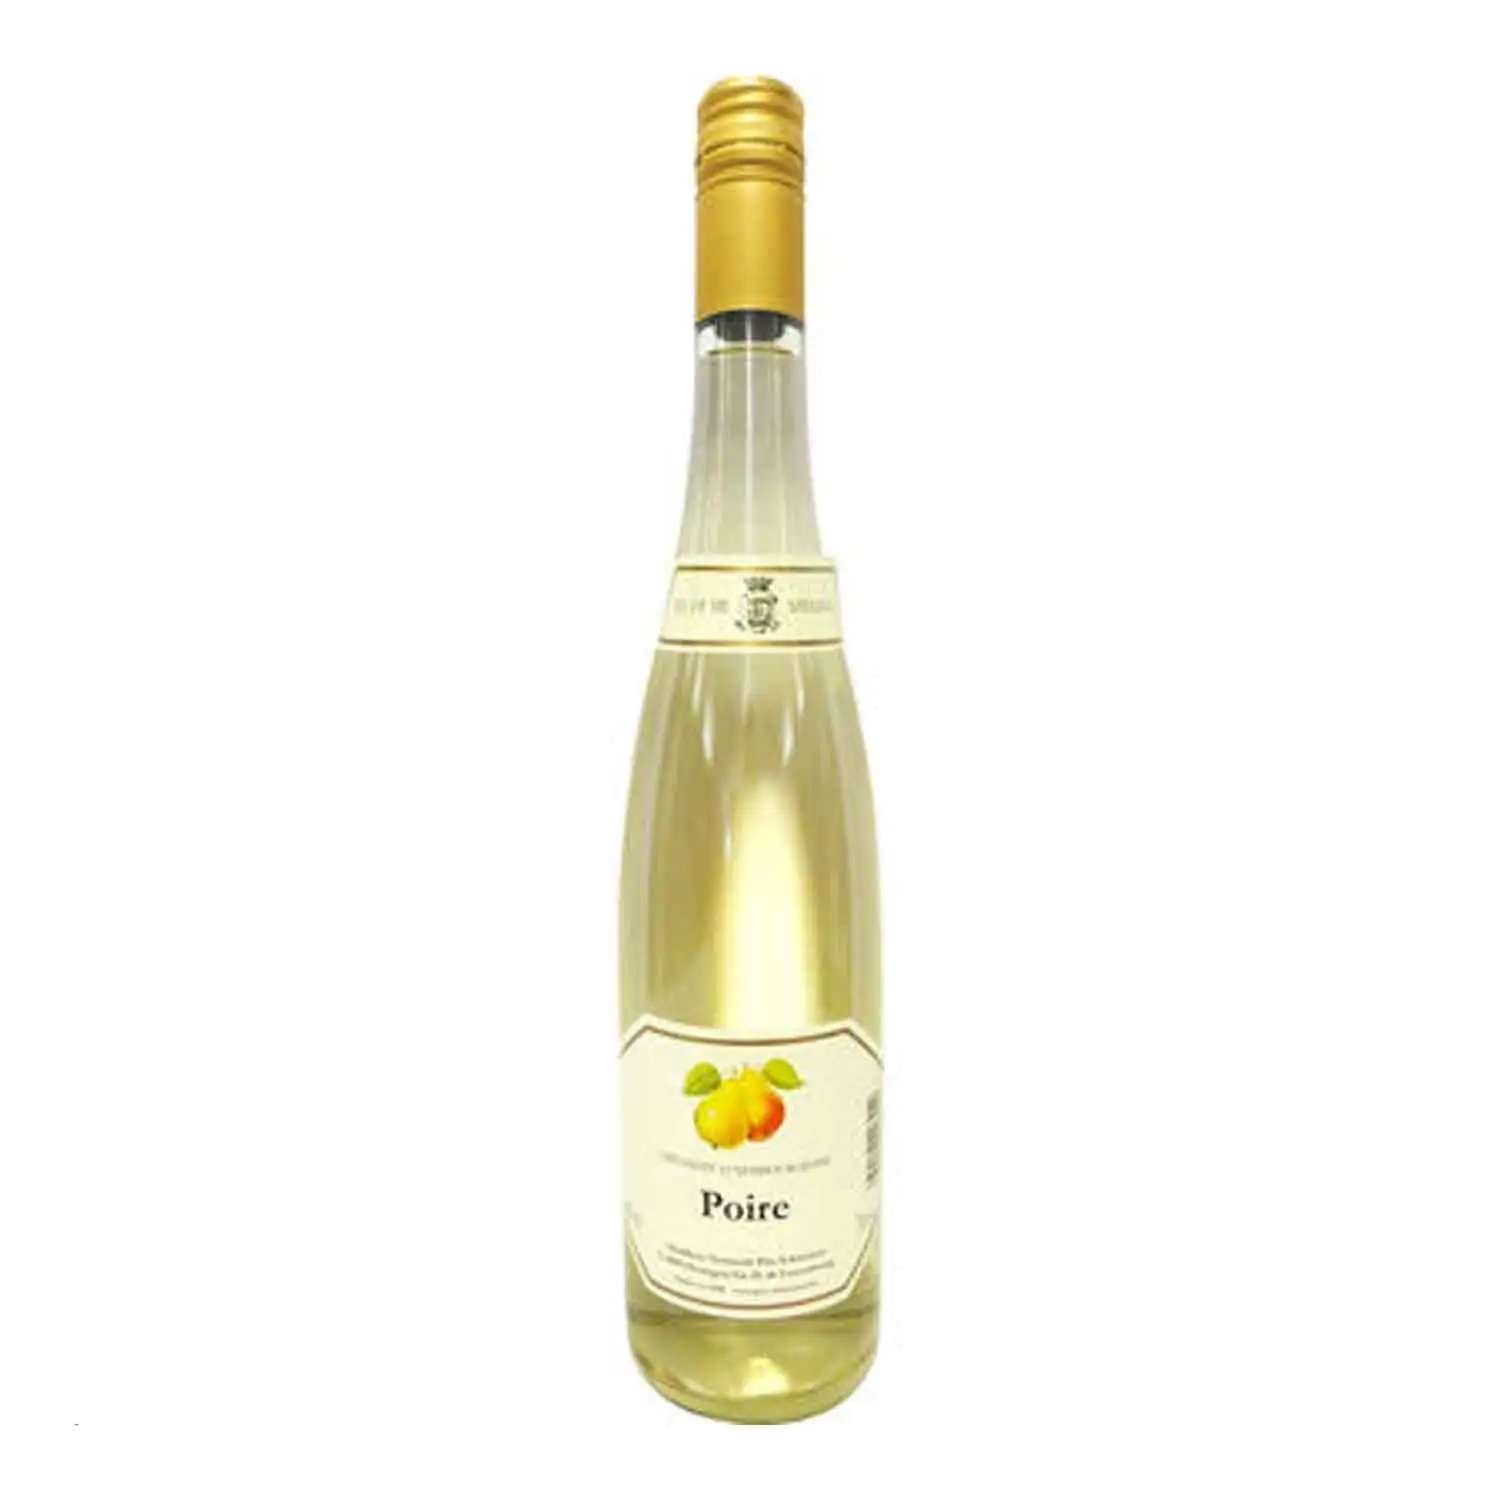 Poire 70cl Alc 40% - Buy at Real Tobacco